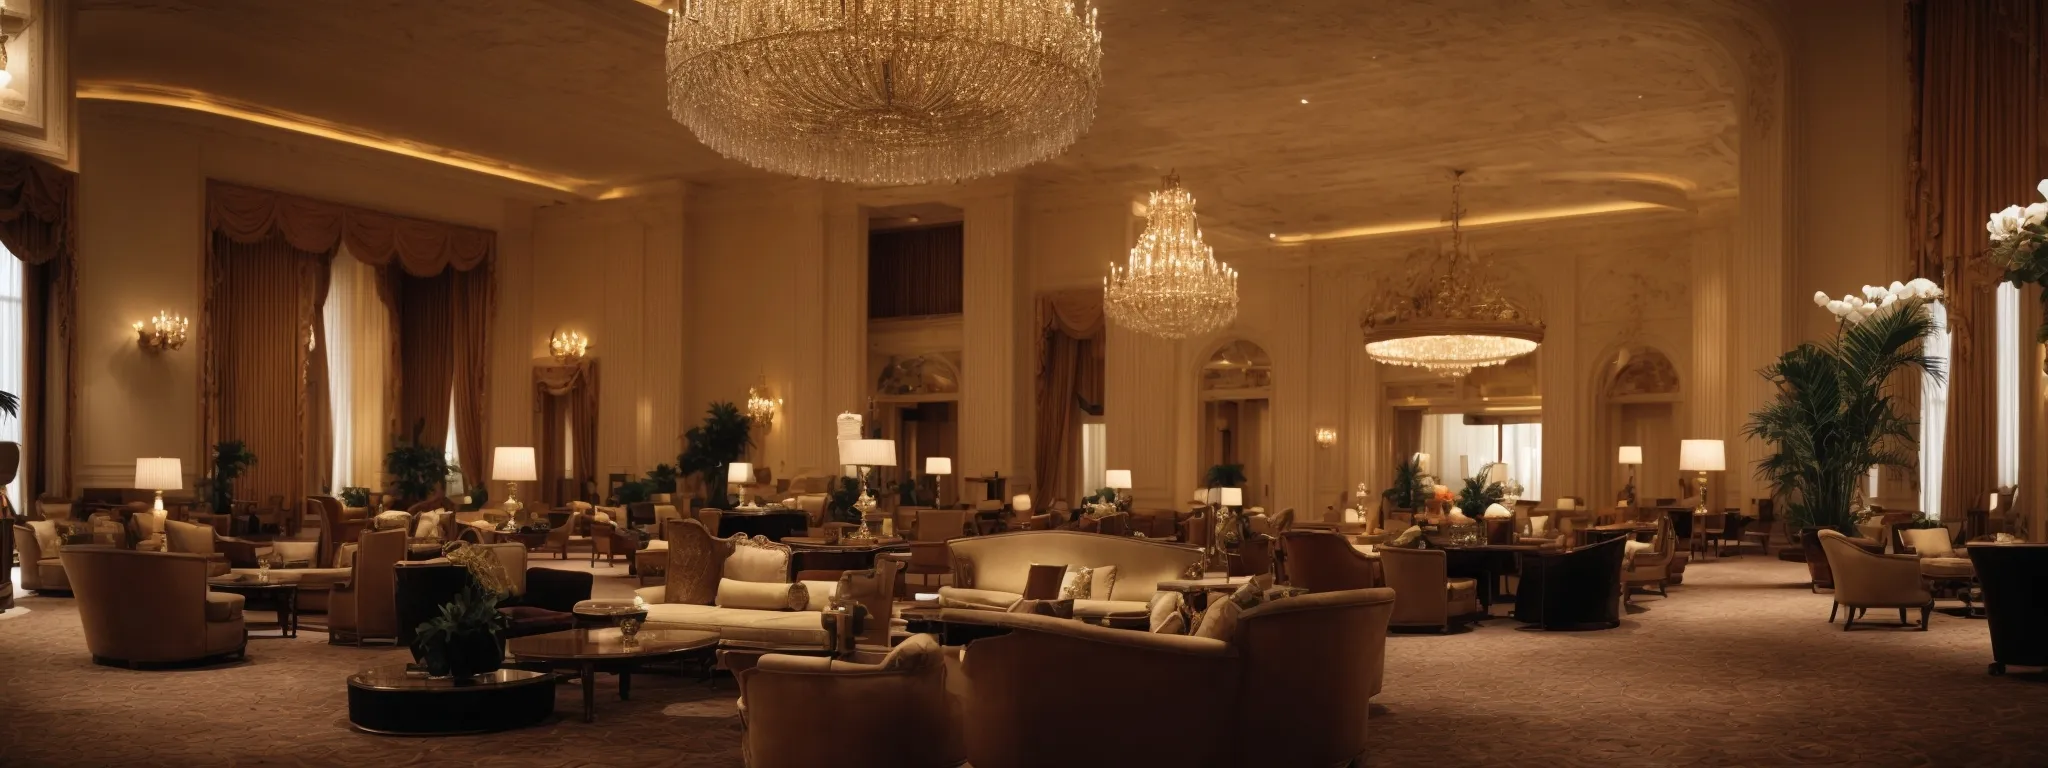 a wide-angle view of a grand hotel lobby with plush seating and opulent decor, beckoning guests to luxury.